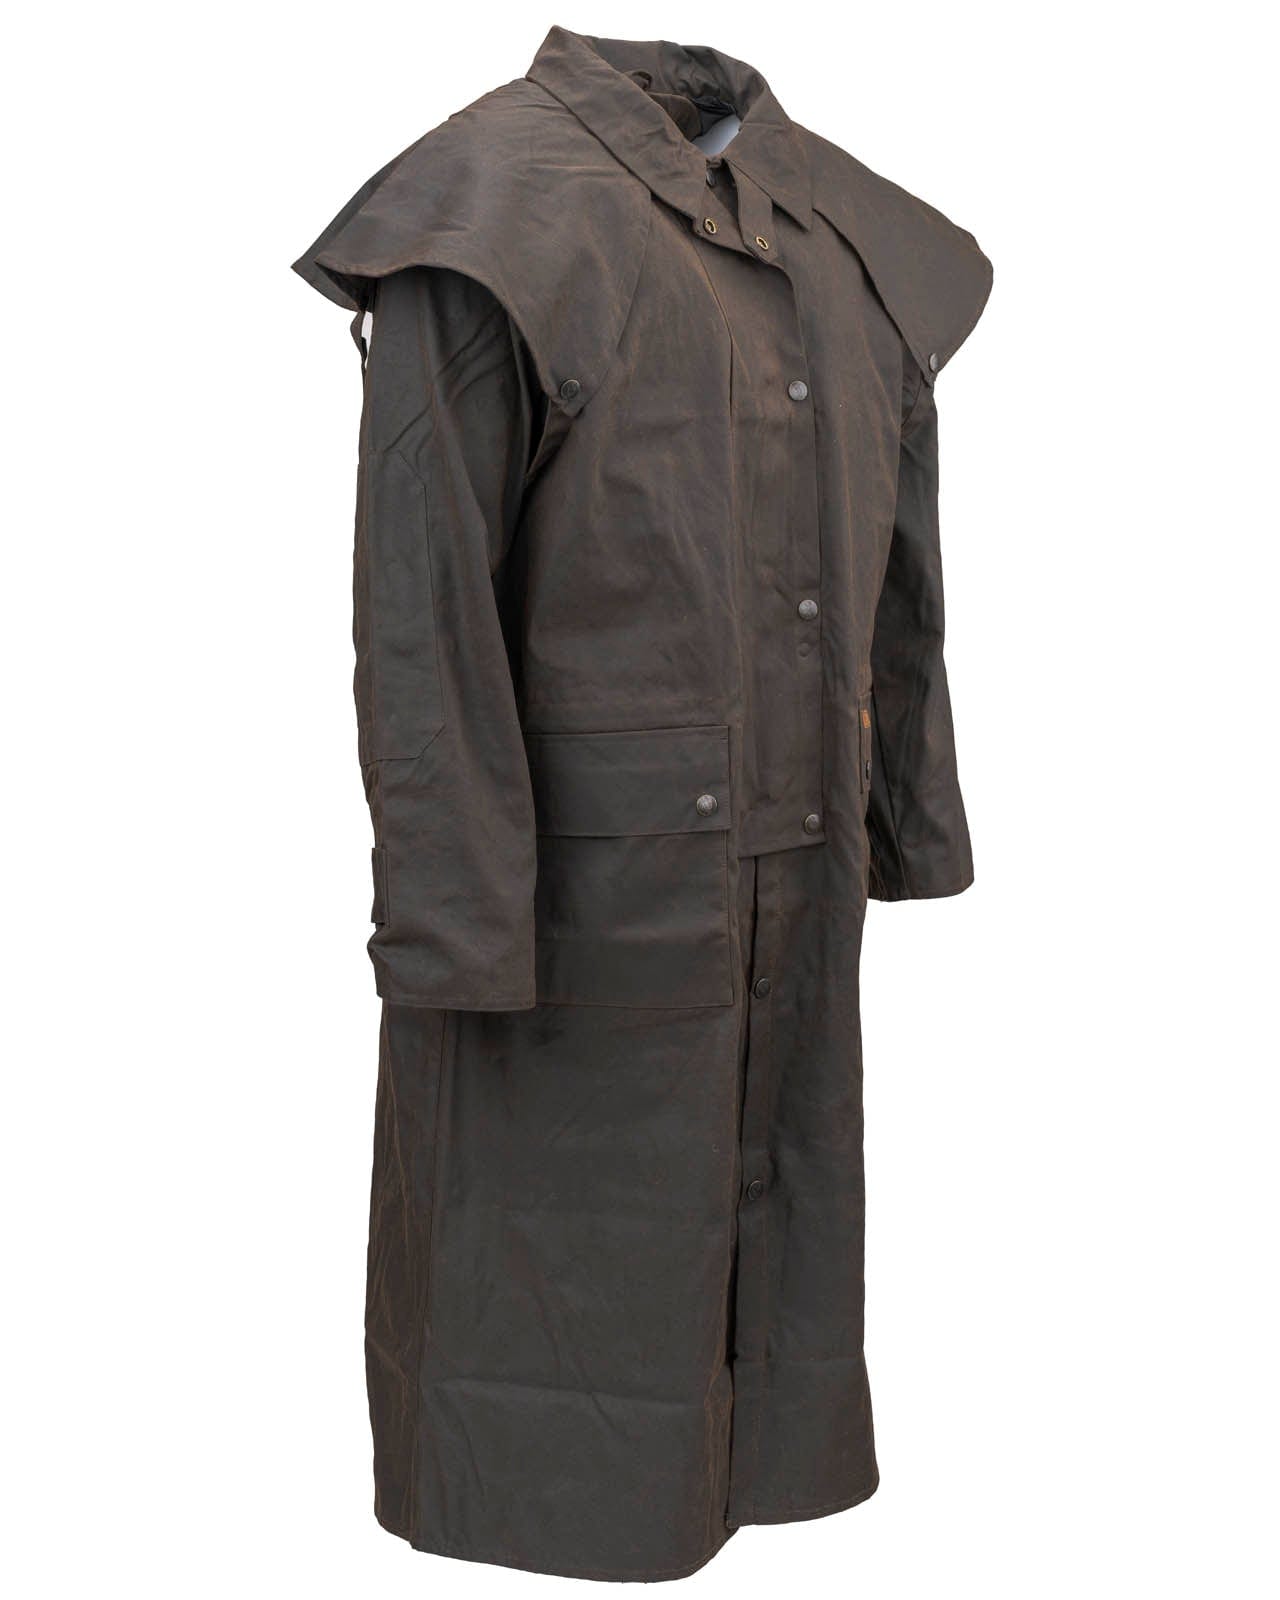 Low Rider Duster | Duster Coats by Outback Trading Company 